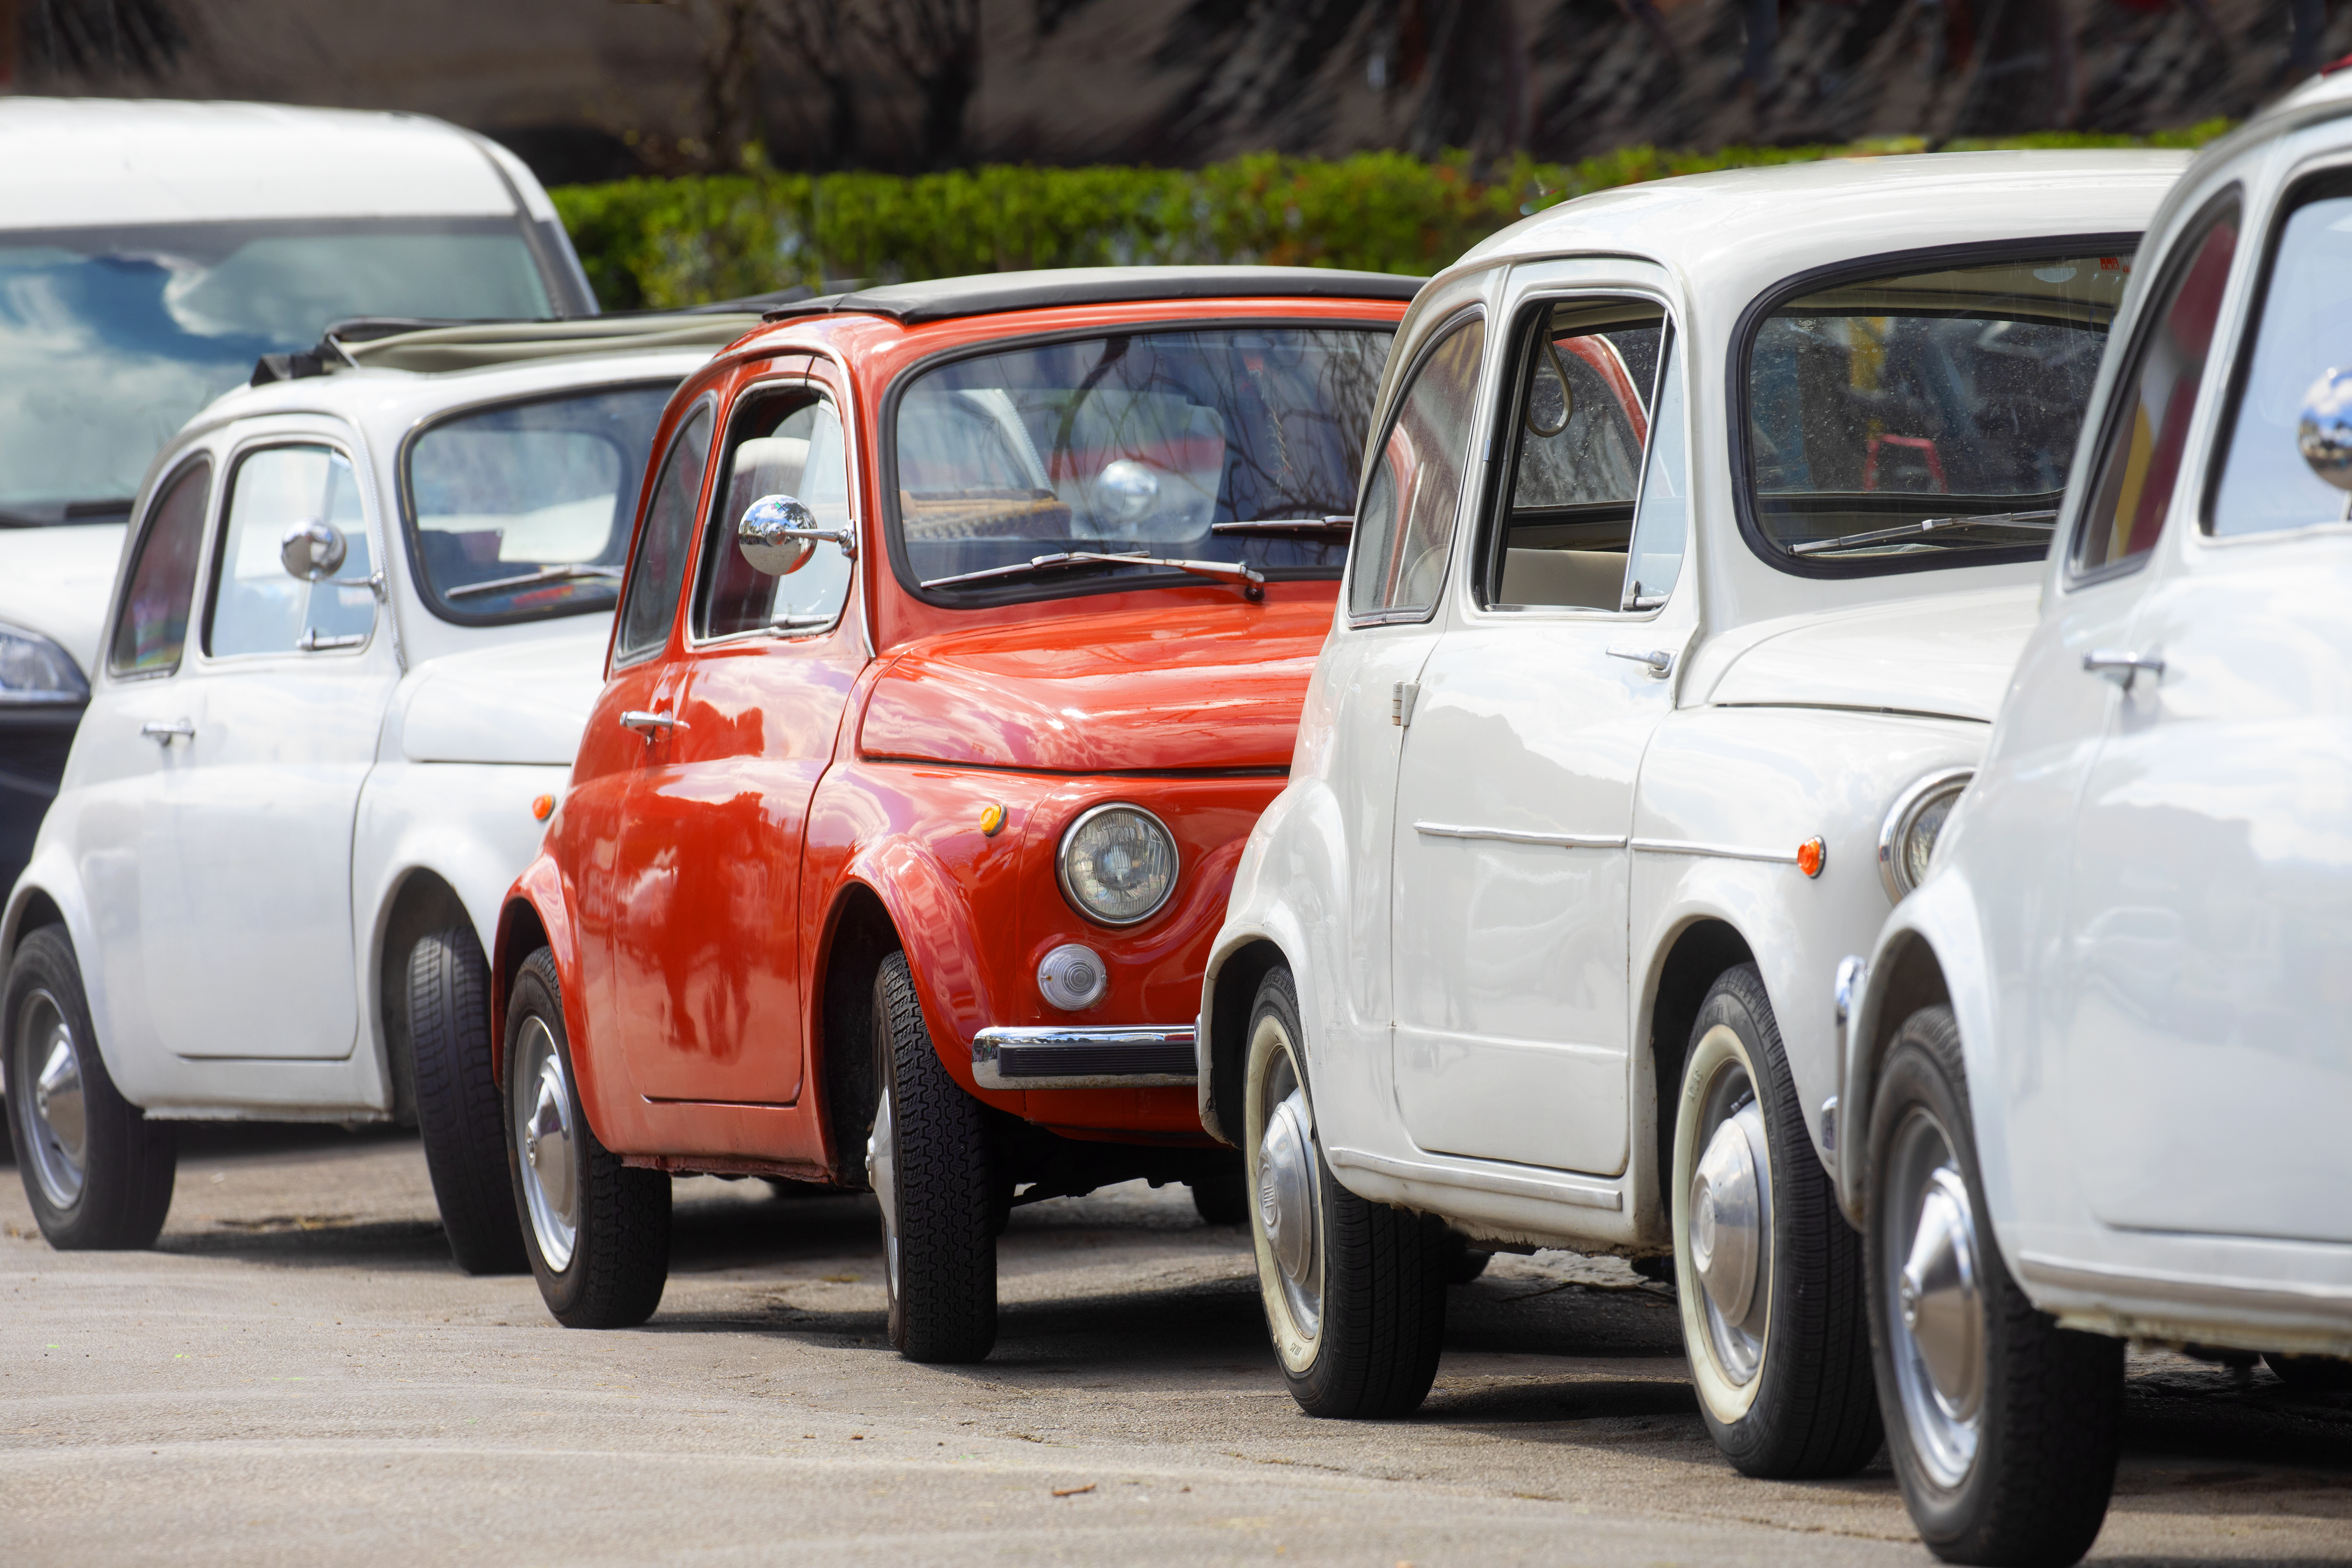 Fuzz recommends classic car owners join up with fellow enthusiasts to learn a thing or two about their motor